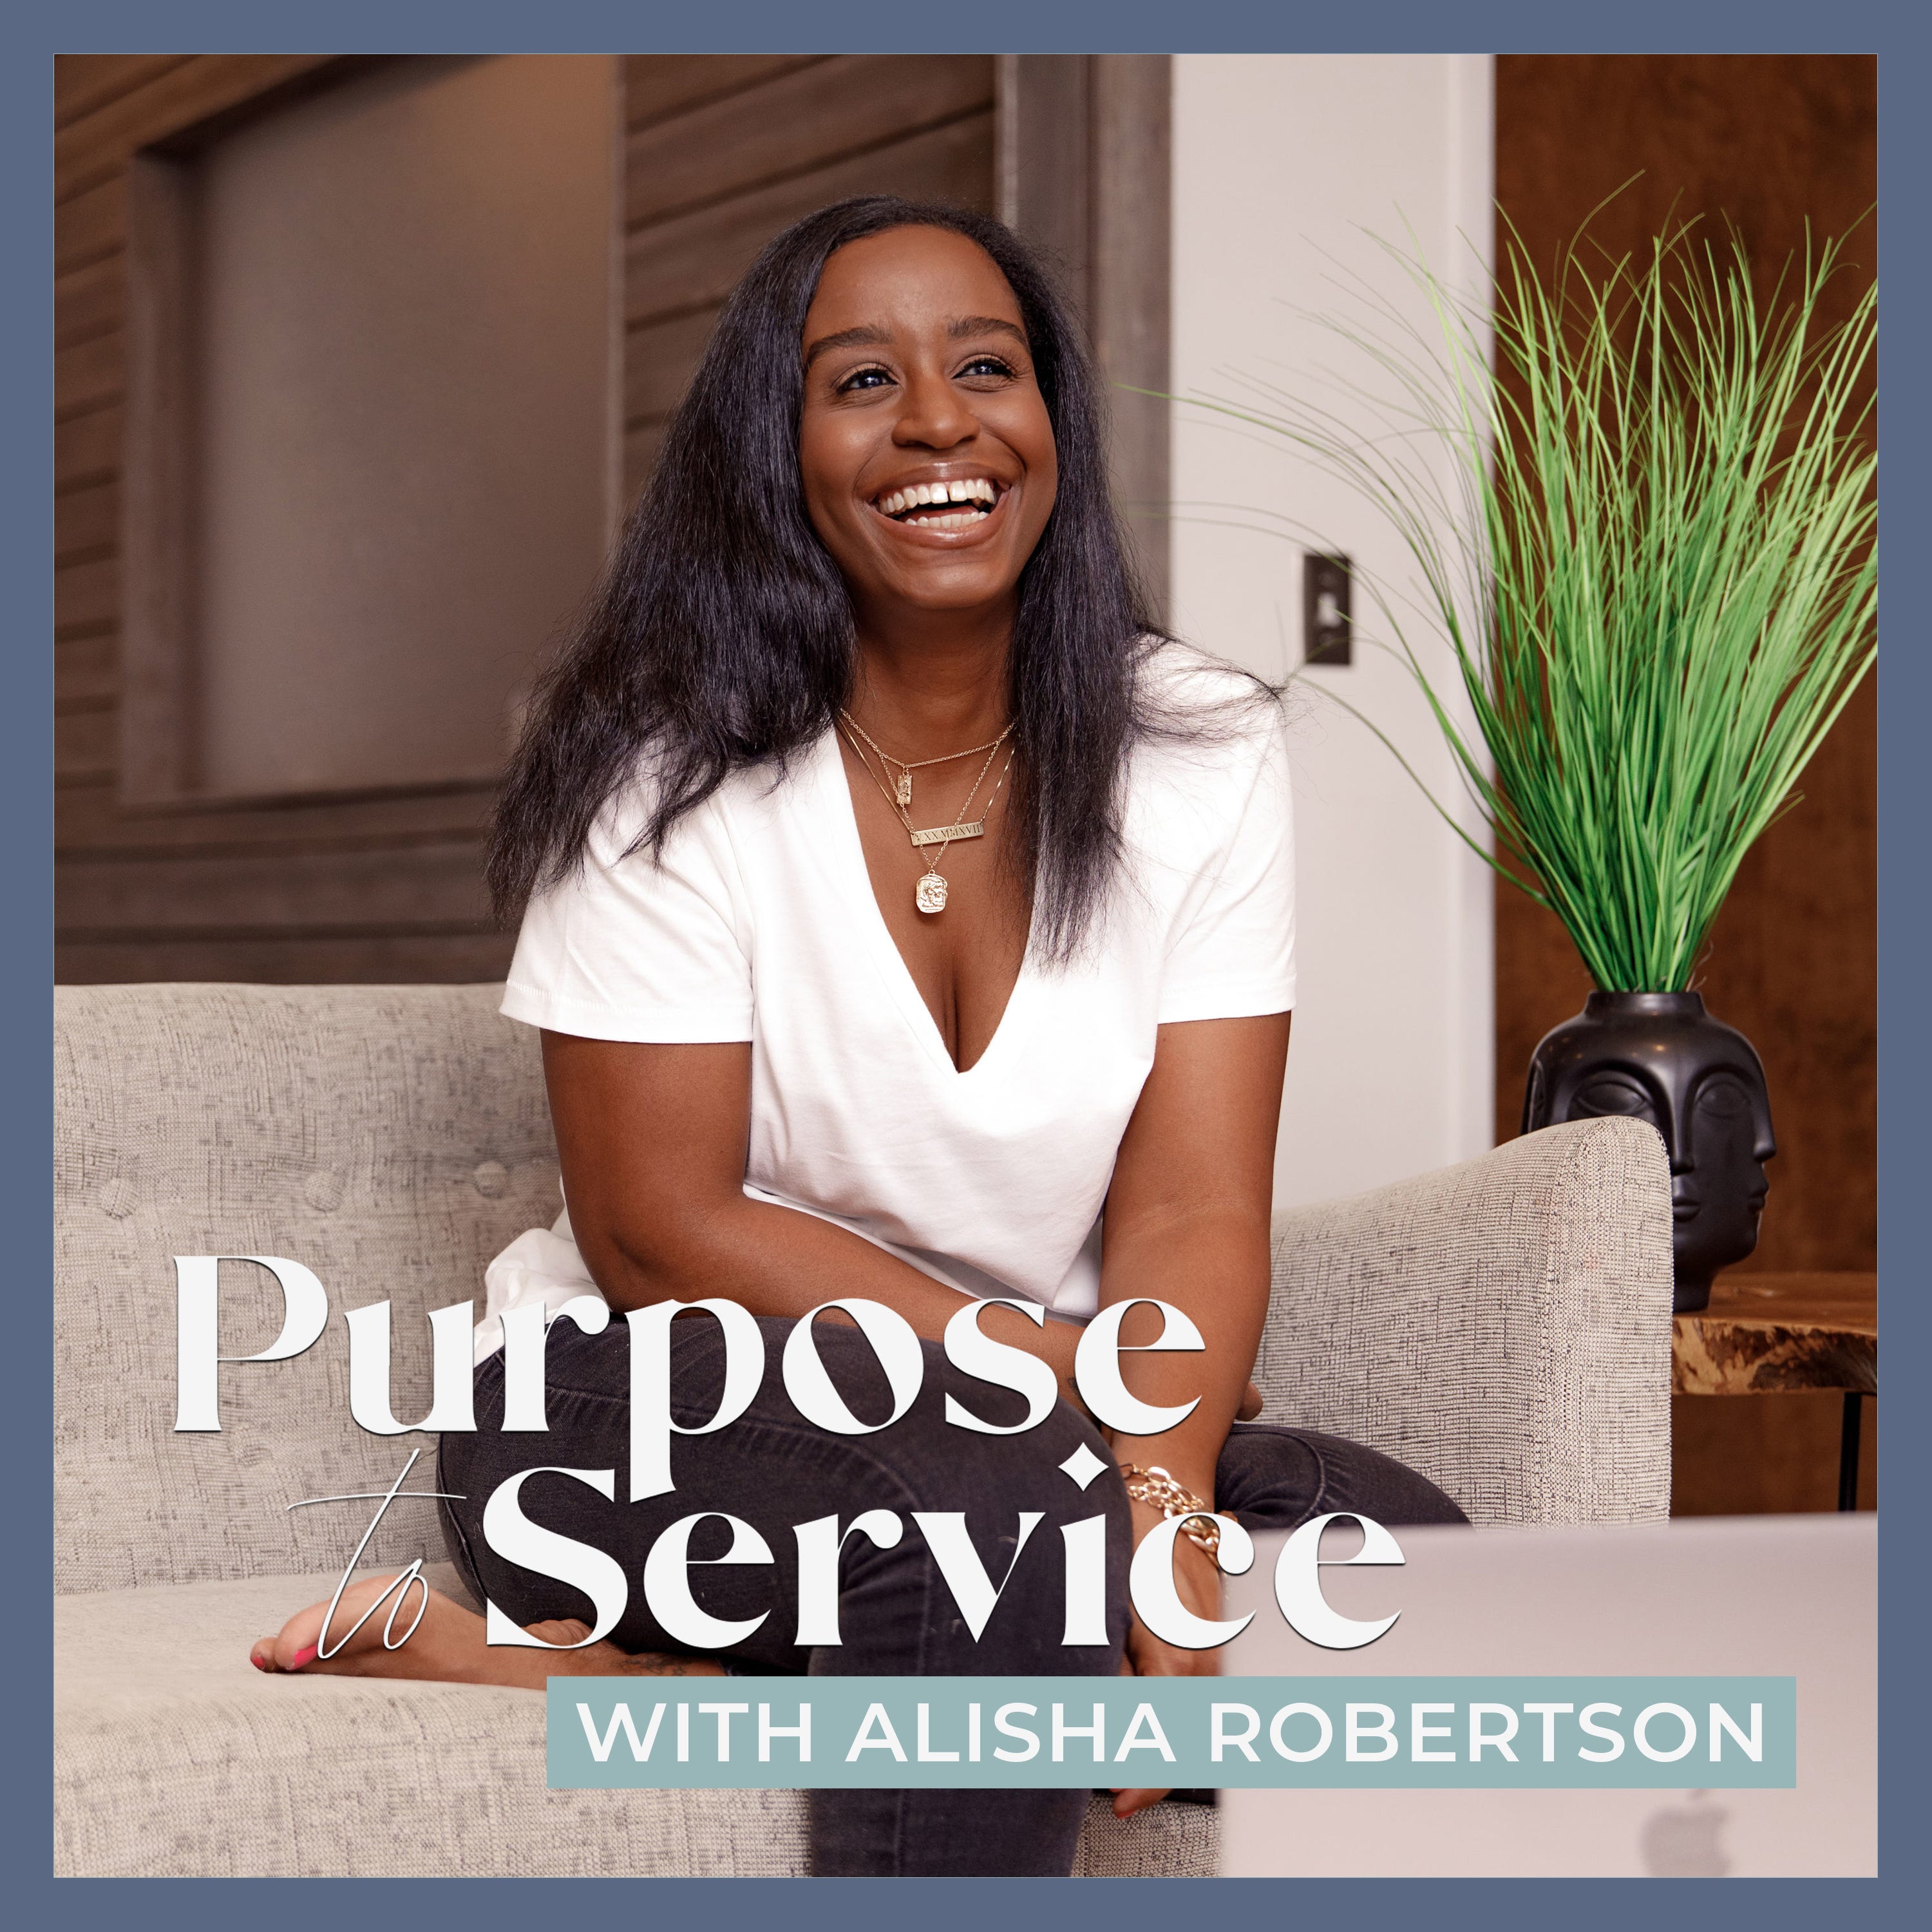 EP 156: Building A Sustainable Business While Doing Less with Ashley Gartland